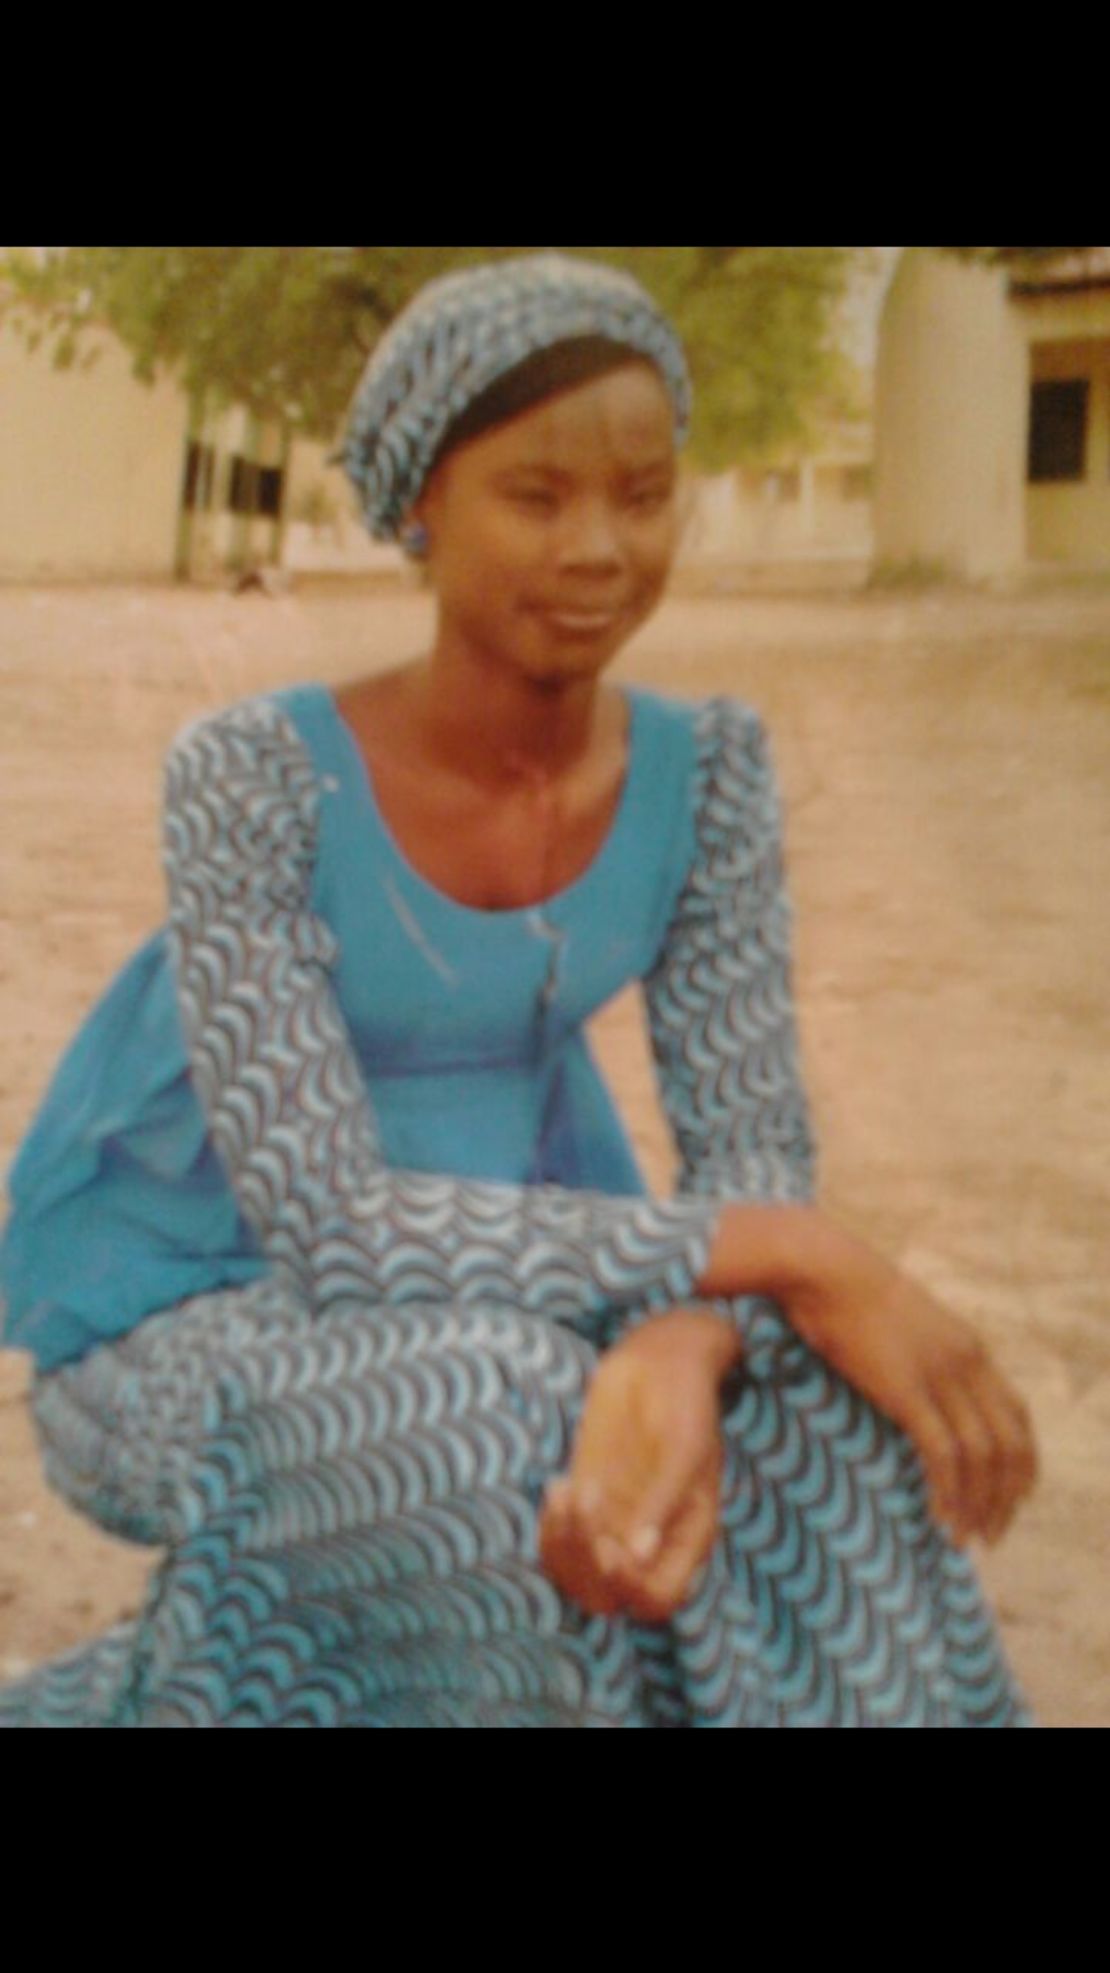 Dorcas Yakubu, also known as Maida, was abducted from her school by Boko Haram militants.